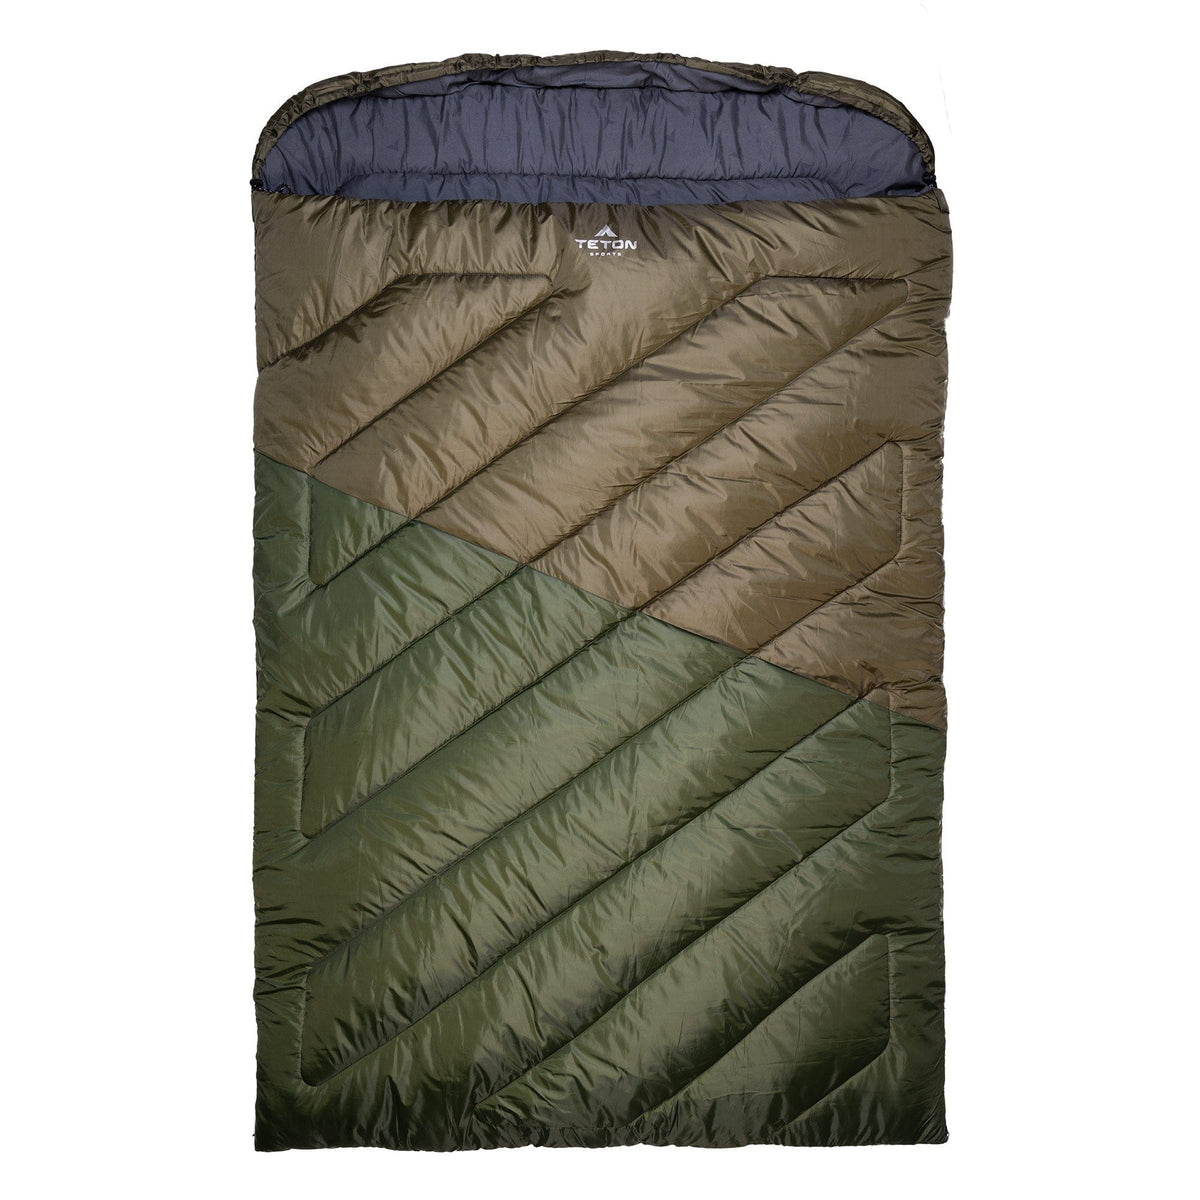 Celsius Mammoth Double 0°F / -18°C Sleeping Bag